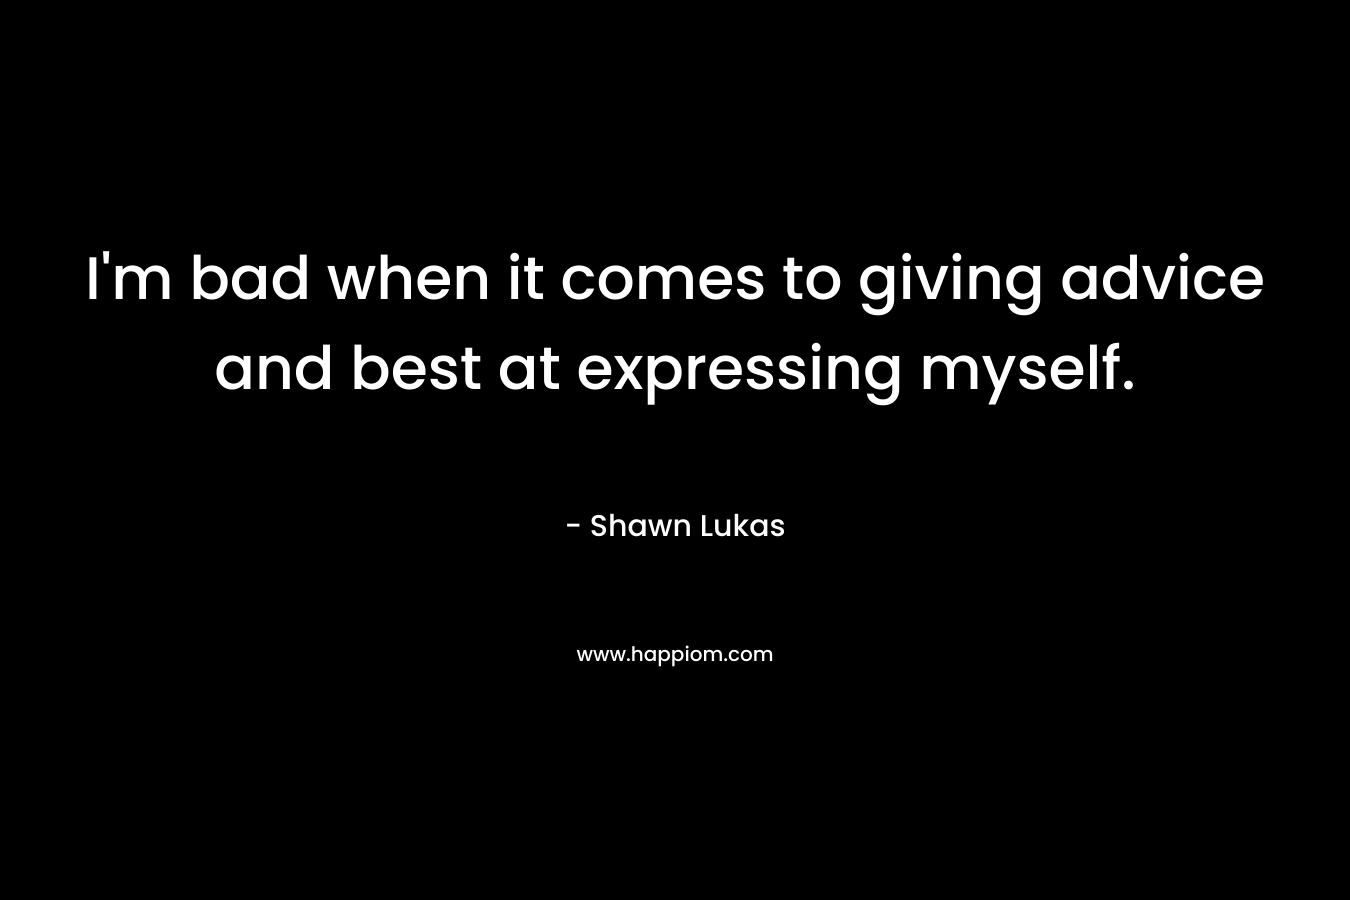 I’m bad when it comes to giving advice and best at expressing myself. – Shawn Lukas